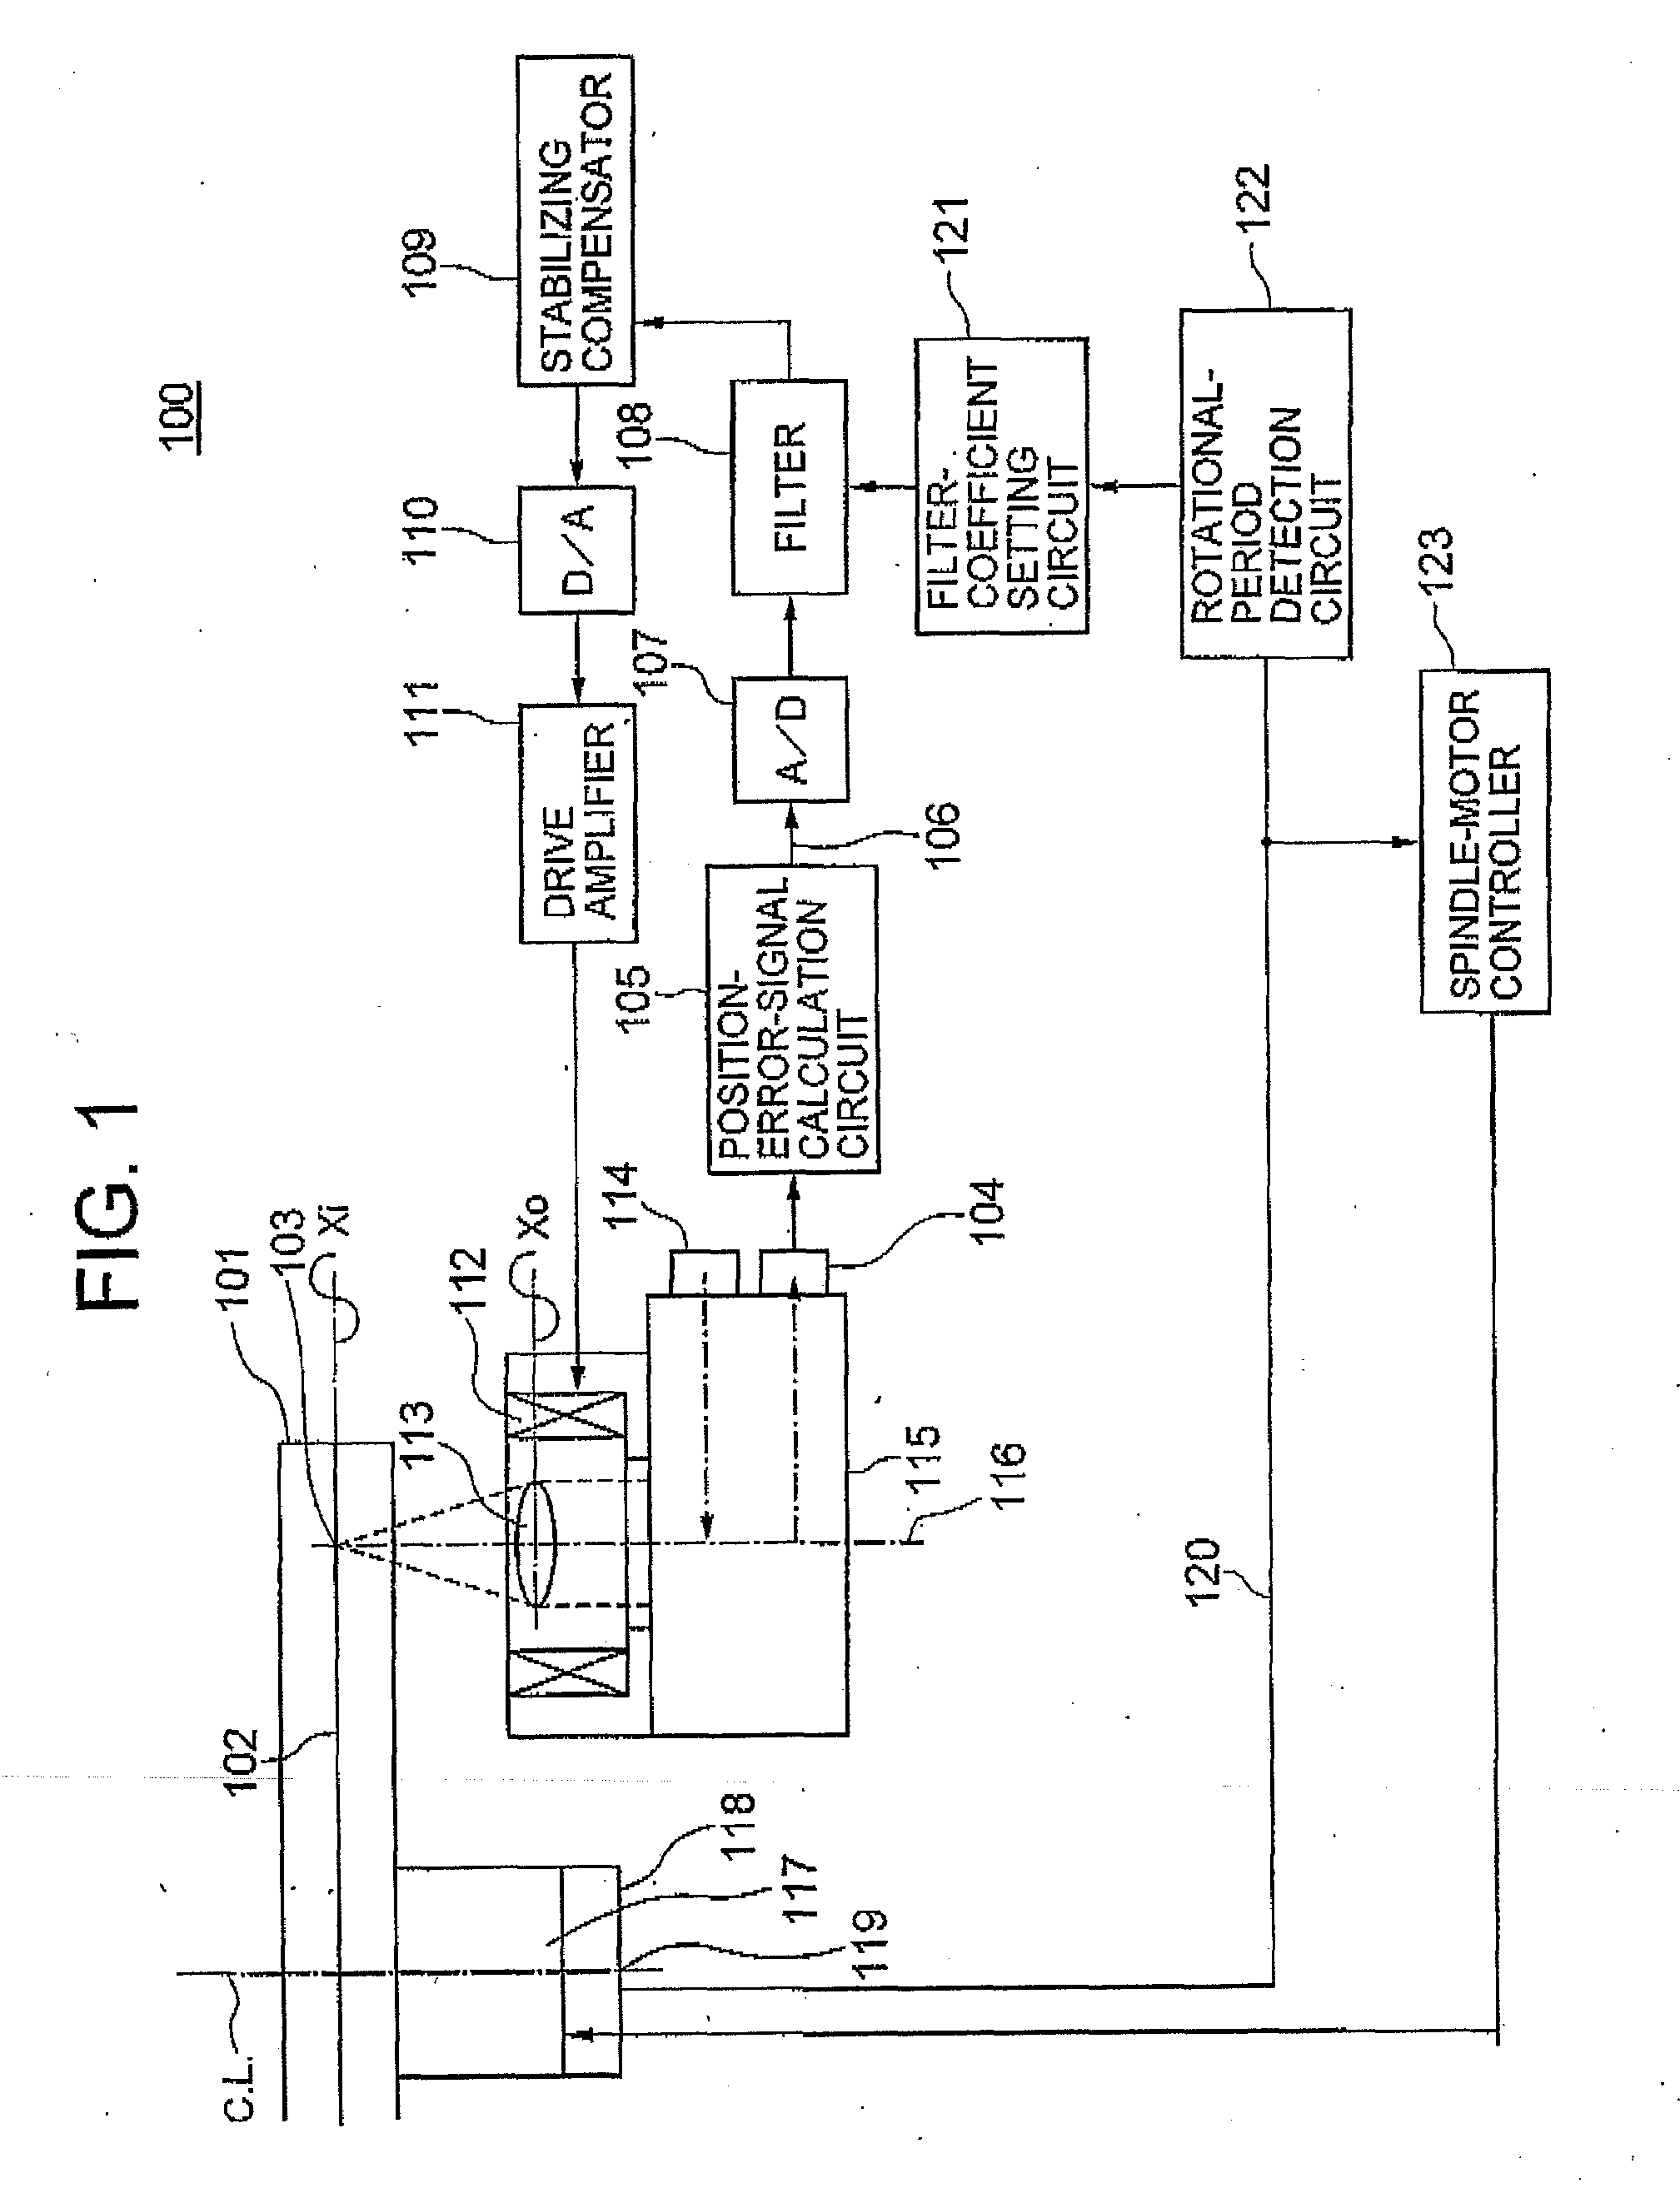 Positioning control unit and optical disk drive